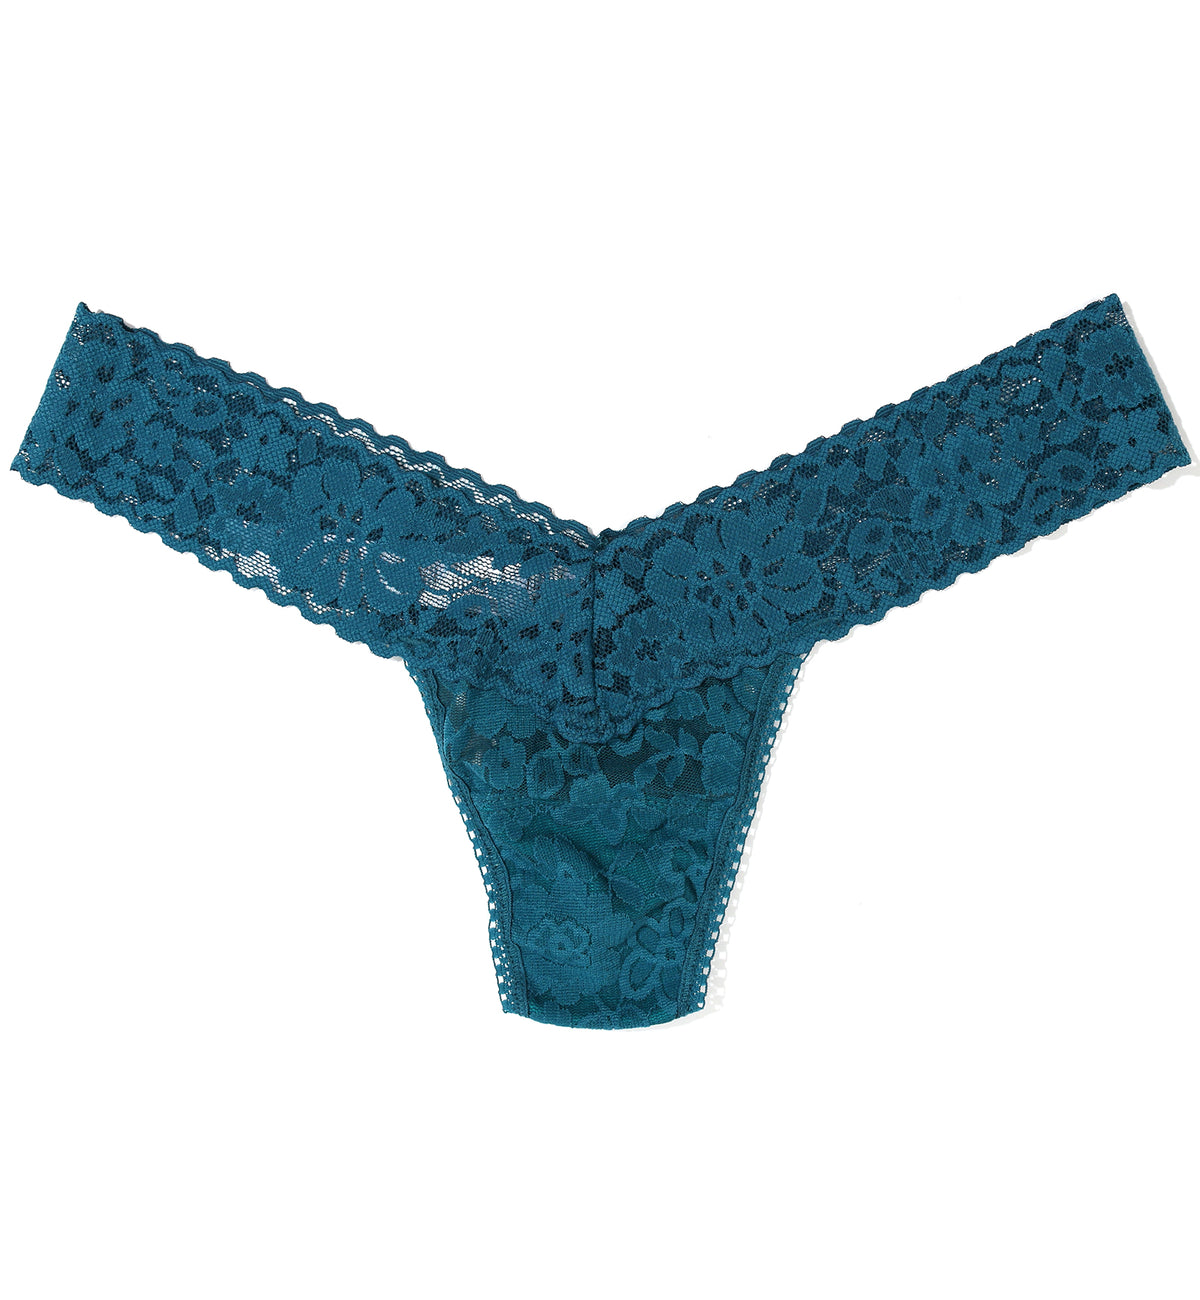 Hanky Panky Daily Lace Low Rise Thong (771001P),Earth Dance - Earth Dance,One Size